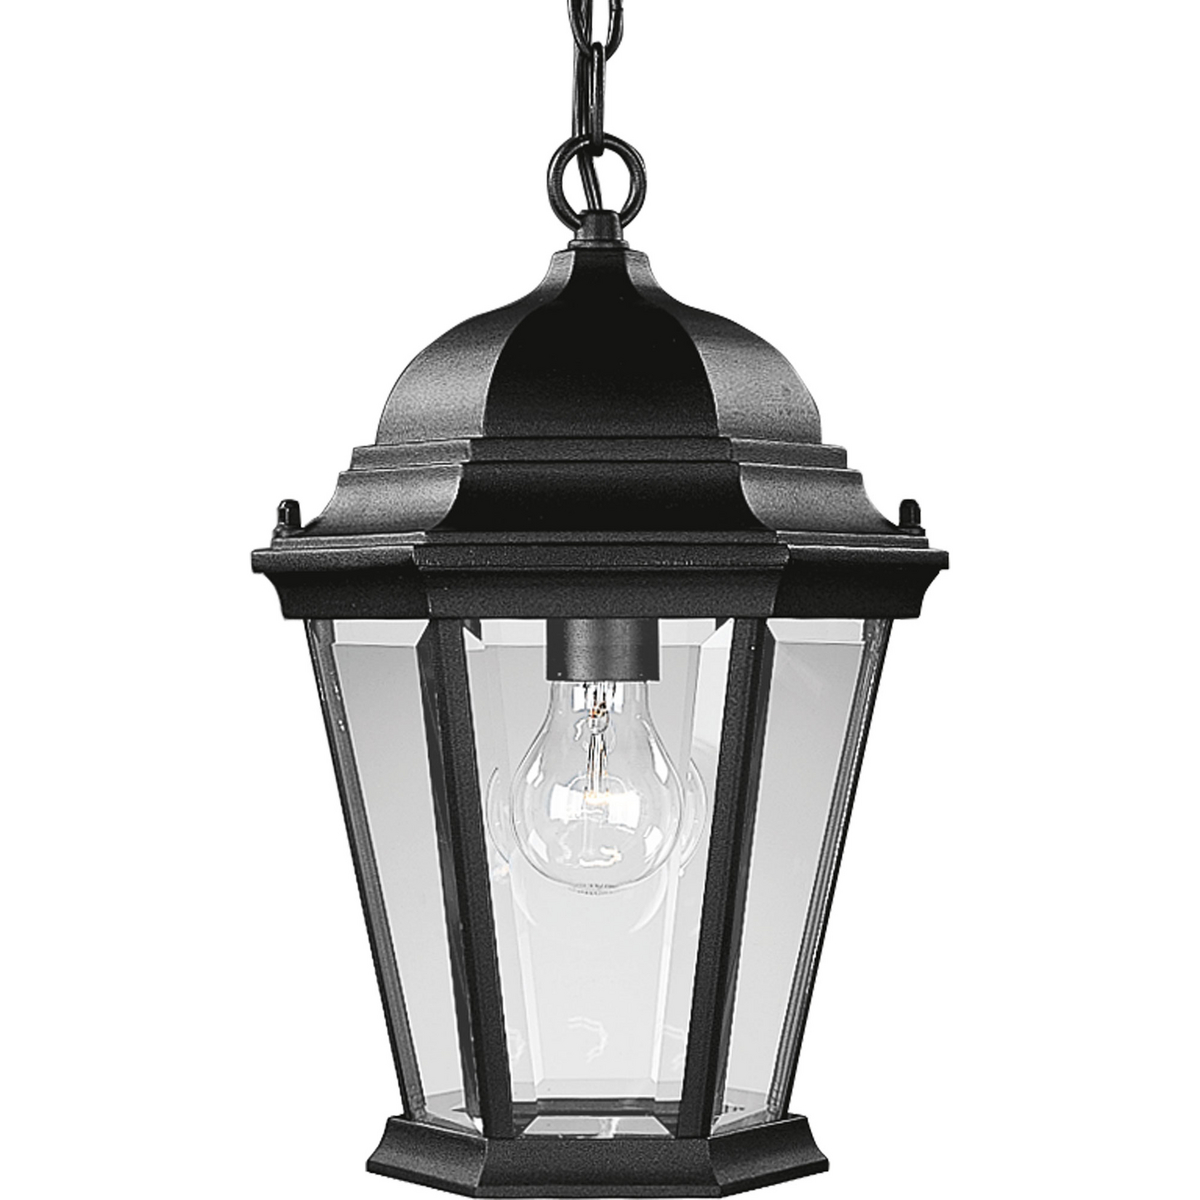 The Welbourne collection features hexagonal framework and clear beveled glass panels. Cast aluminum construction with durable powder coat finish. One-light hanging lantern.